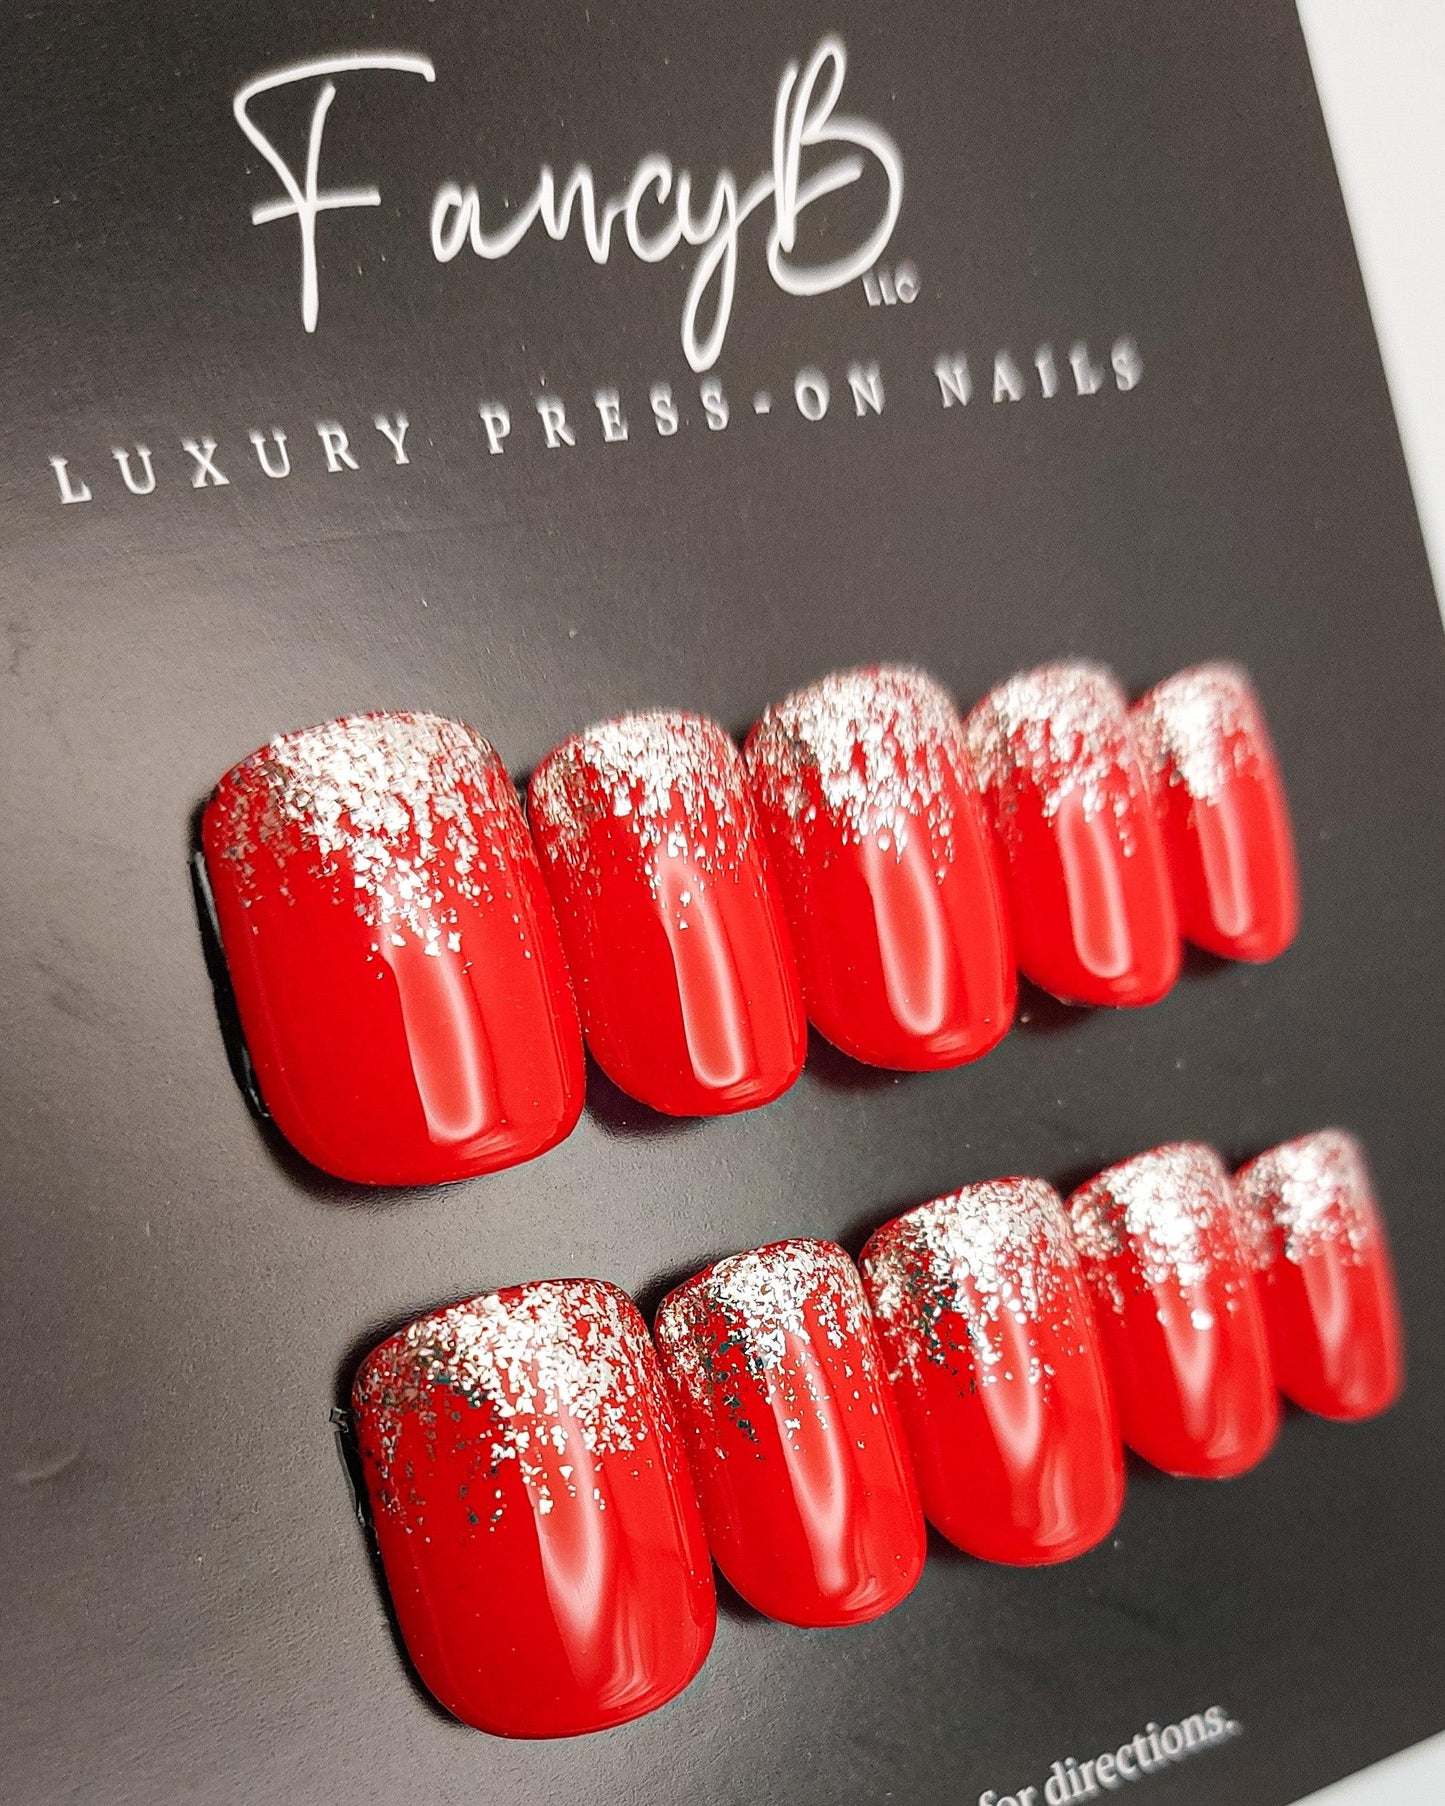 Glitter Tips | Ultra Glittery Press on Tips Fading into Solid Color - FancyB Press-on Nails